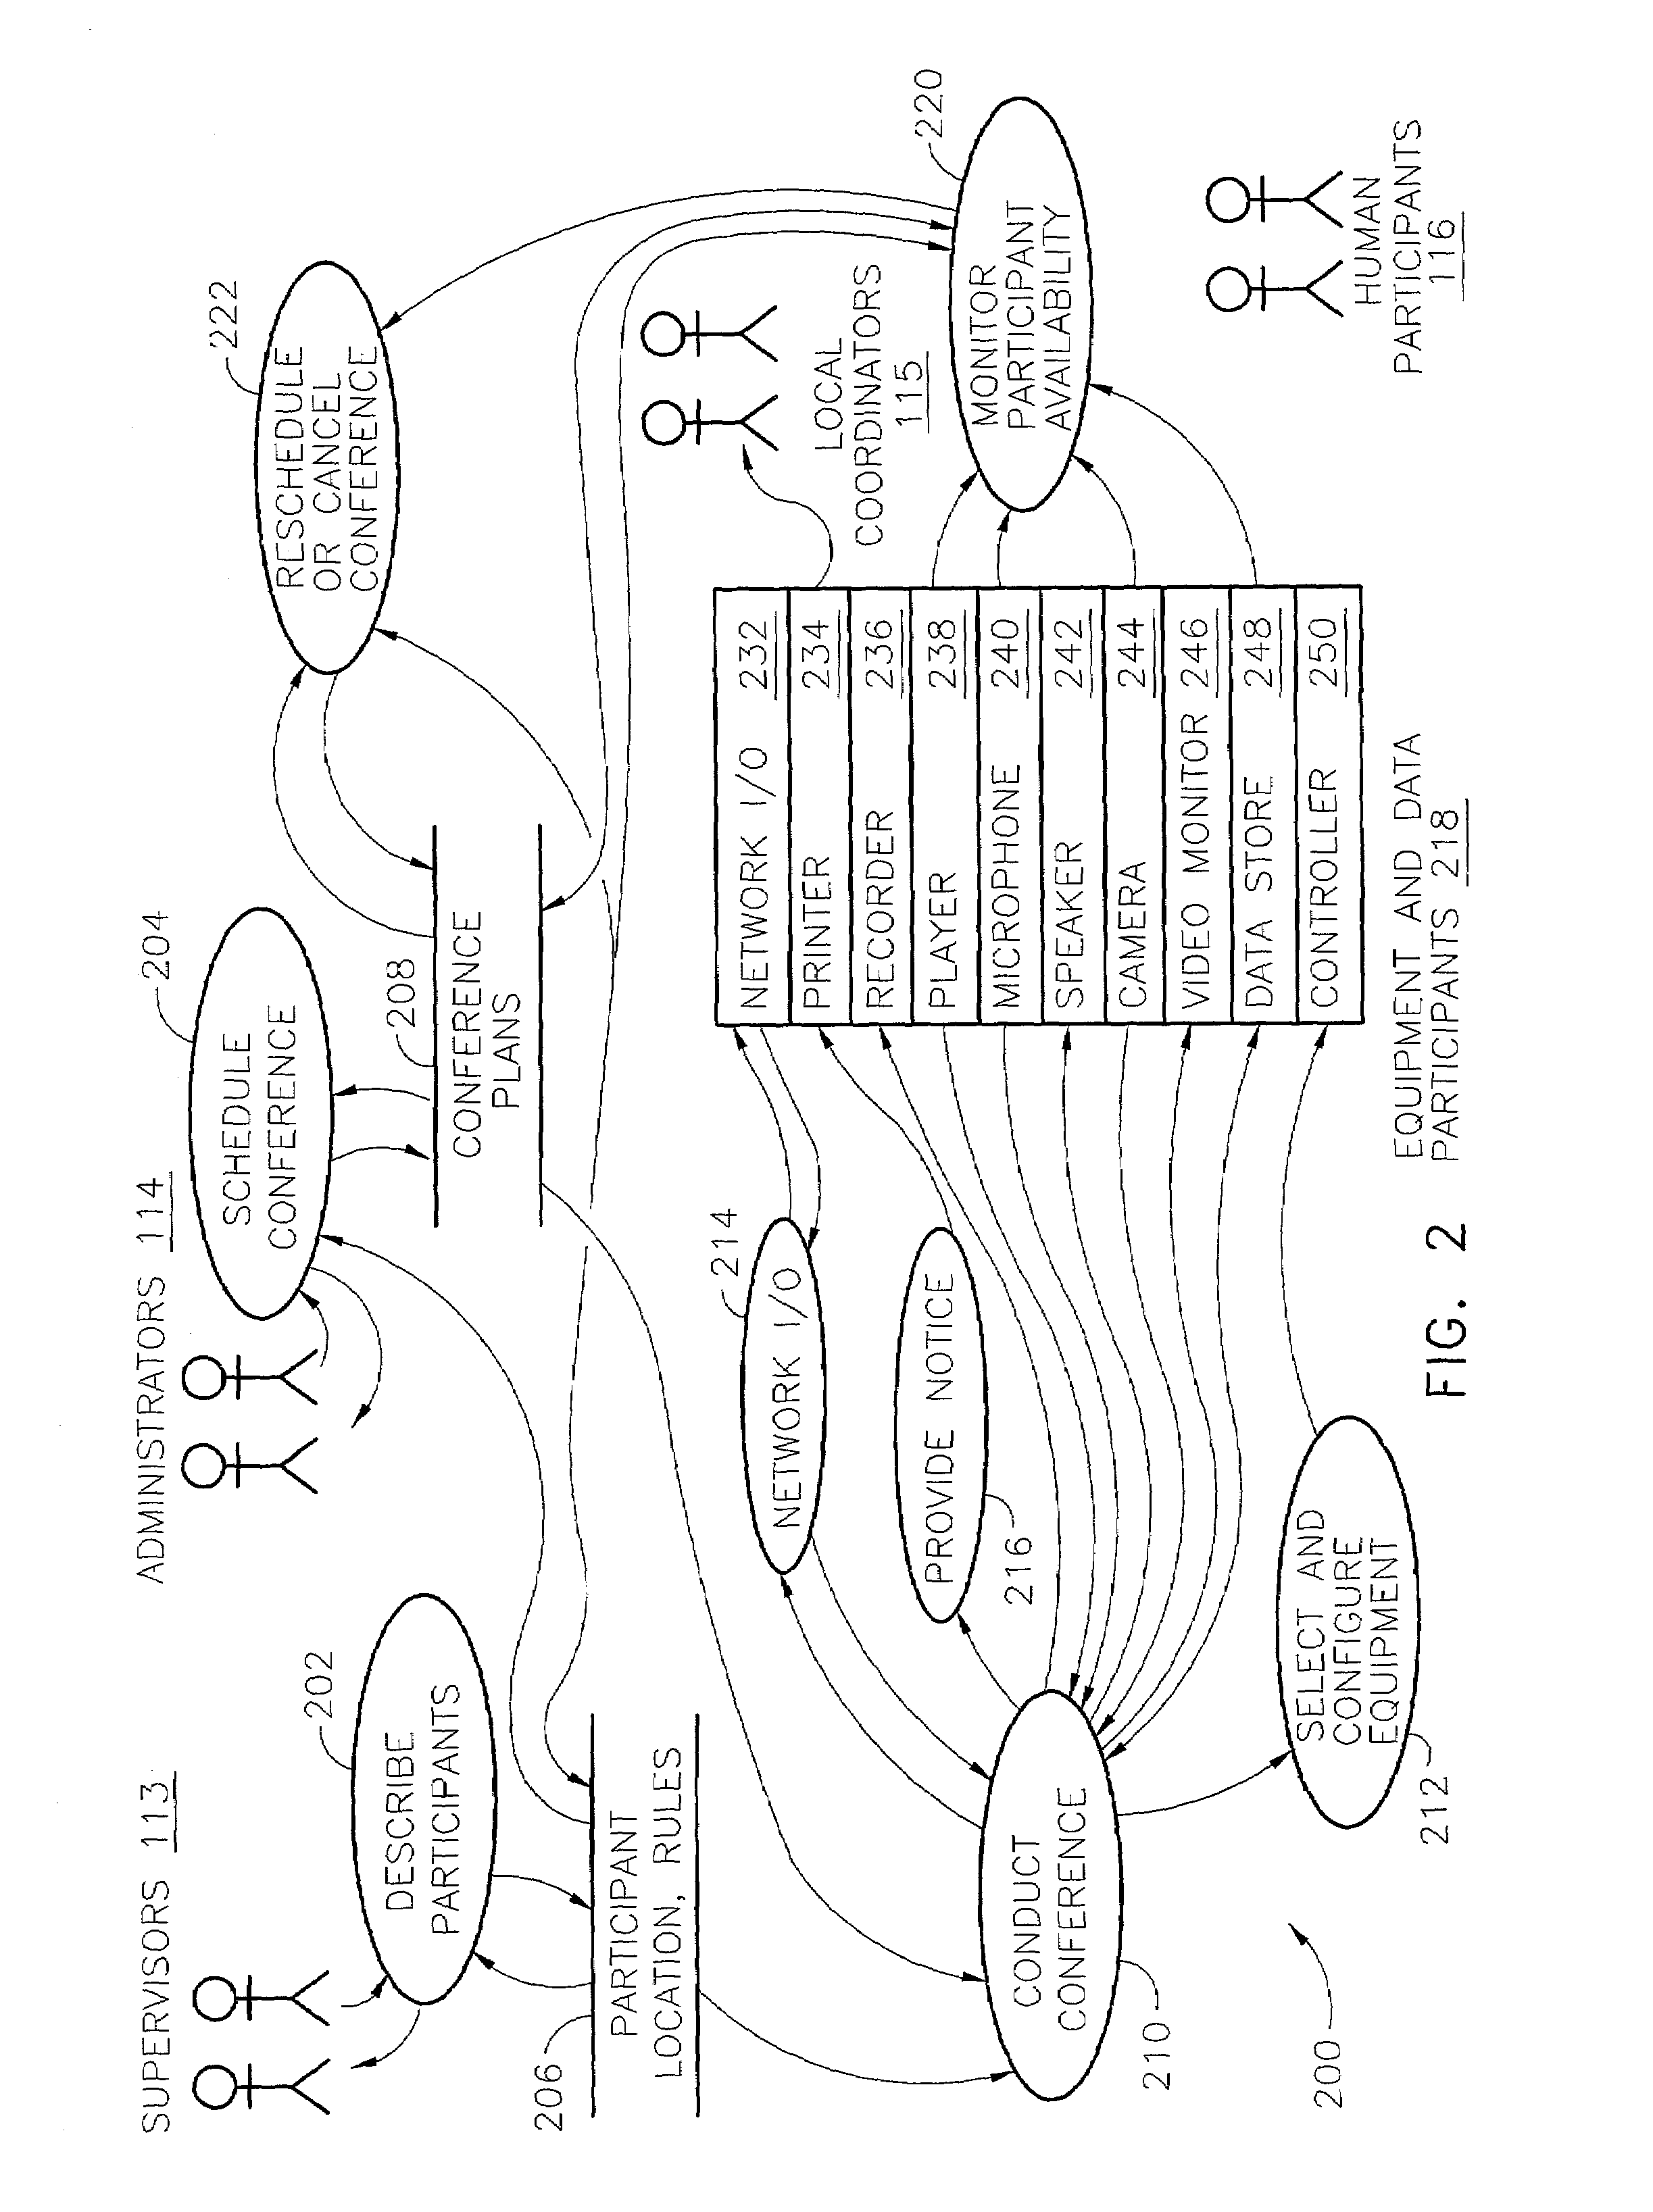 Video conference system and methods for use at multi-station sites